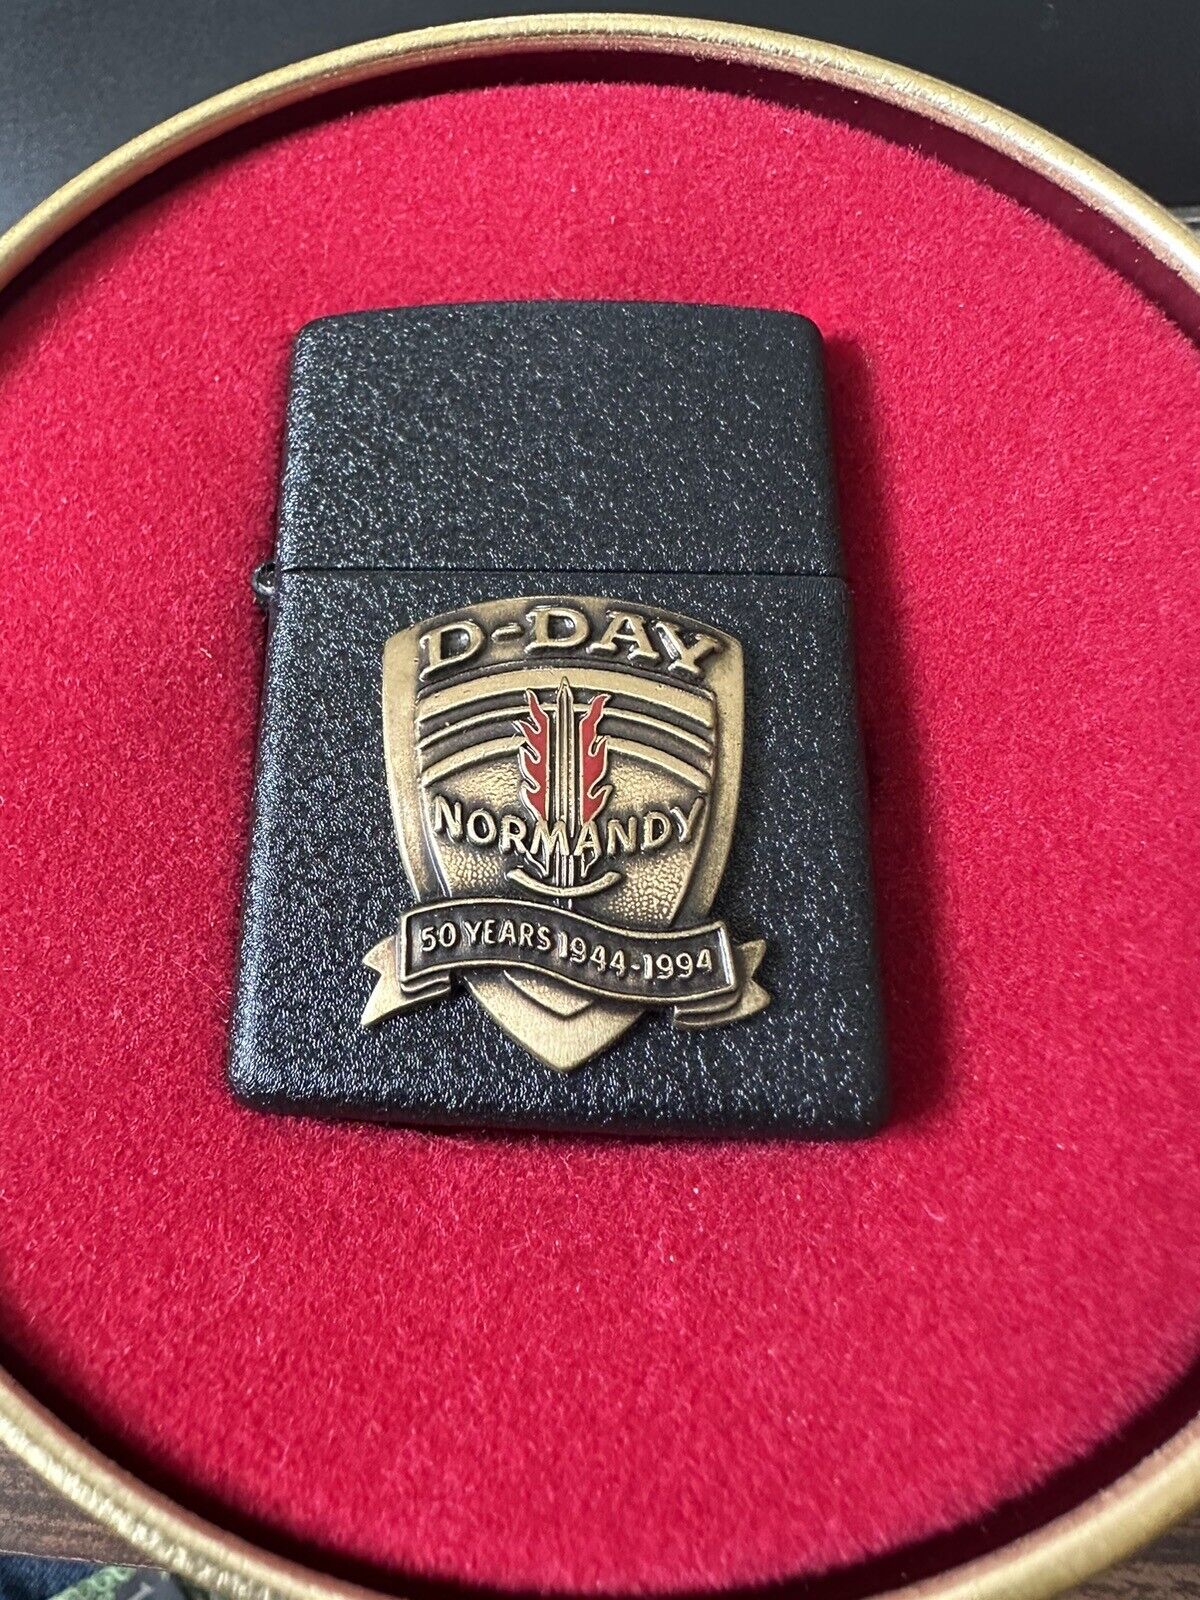 D-DAY COMMEMORATIVE LIGHTER BLACK 50 YEAR ANNIVERSARY WITH TIN CASE USA MADE NEW